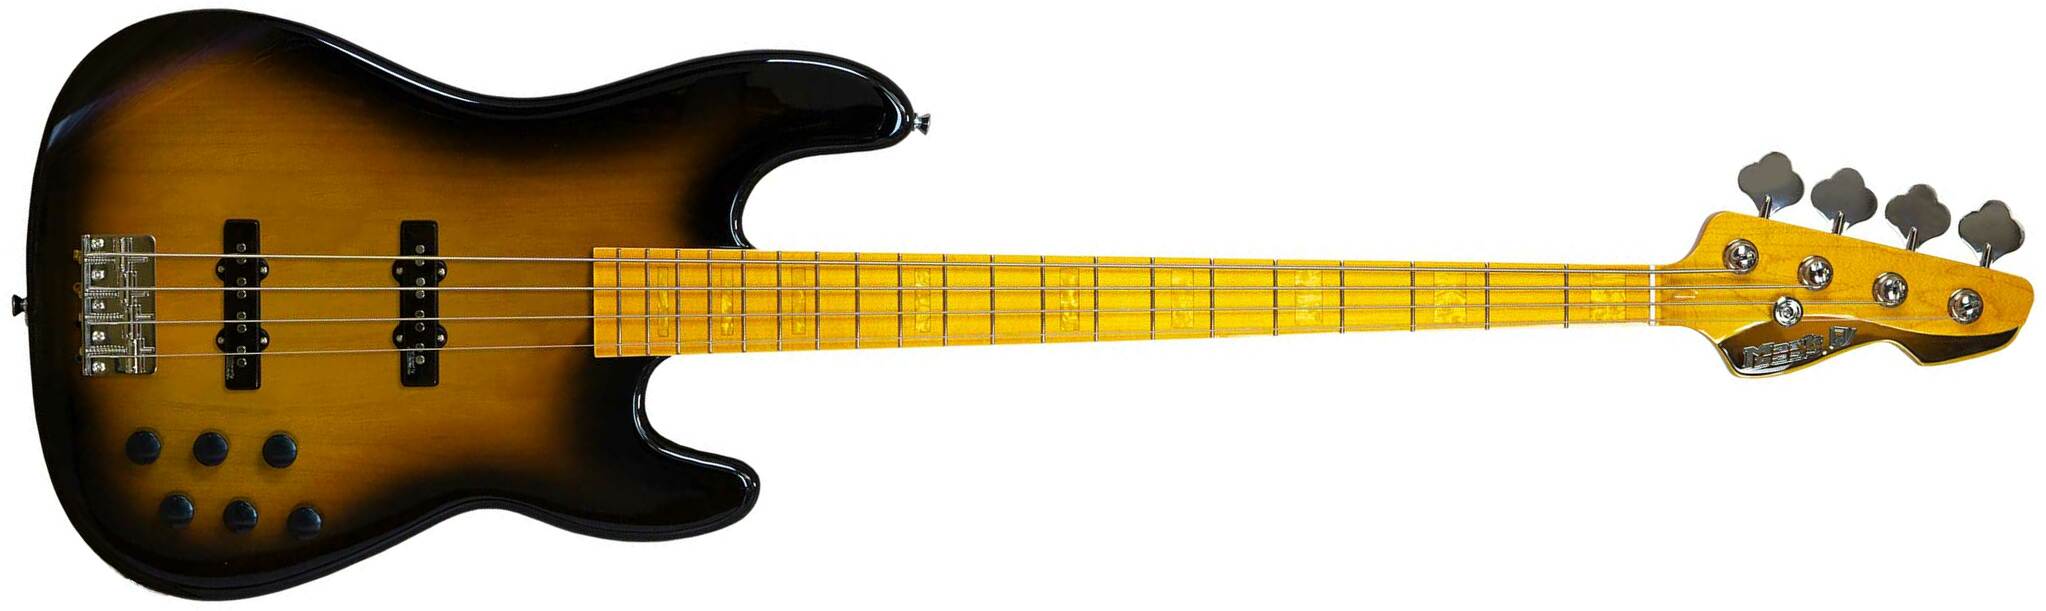 Markbass Mb Gv 4 Gloxy Val Cr Mp Active Mn - Tobacco Sunburst - Basse Électrique Solid Body - Main picture